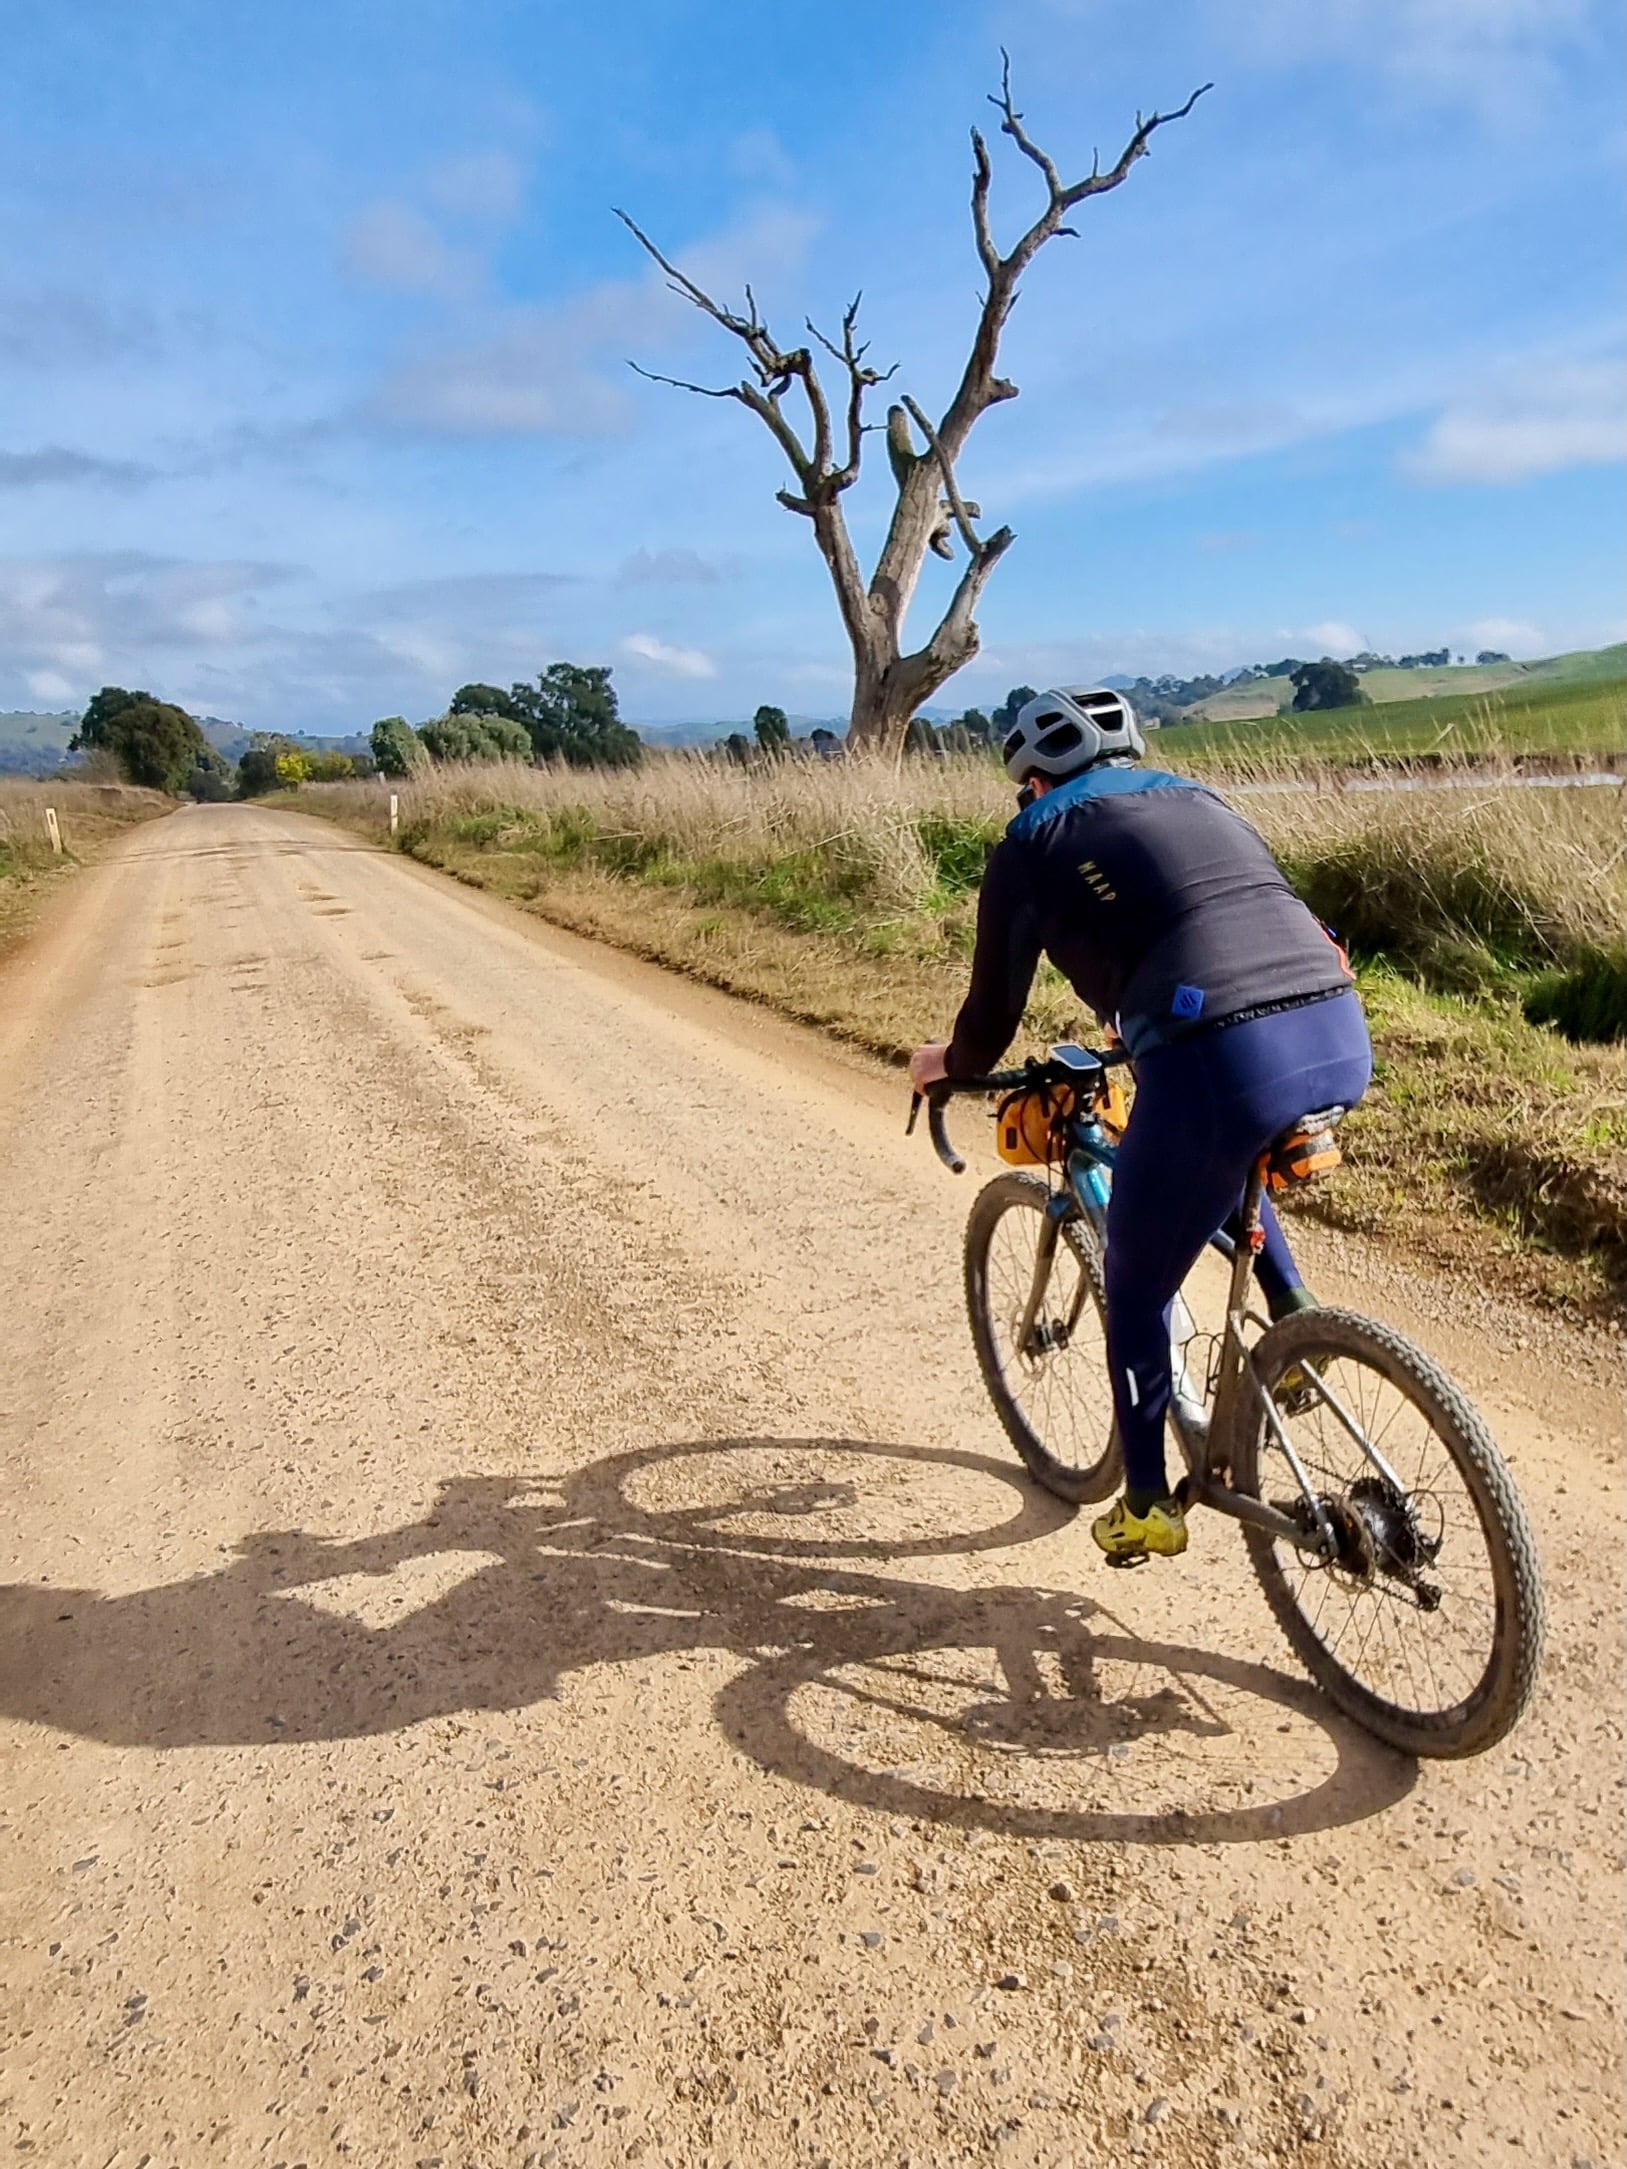 Cyclist riding through open farmland on a smooth gravel road with native trees in the background on a sunny day